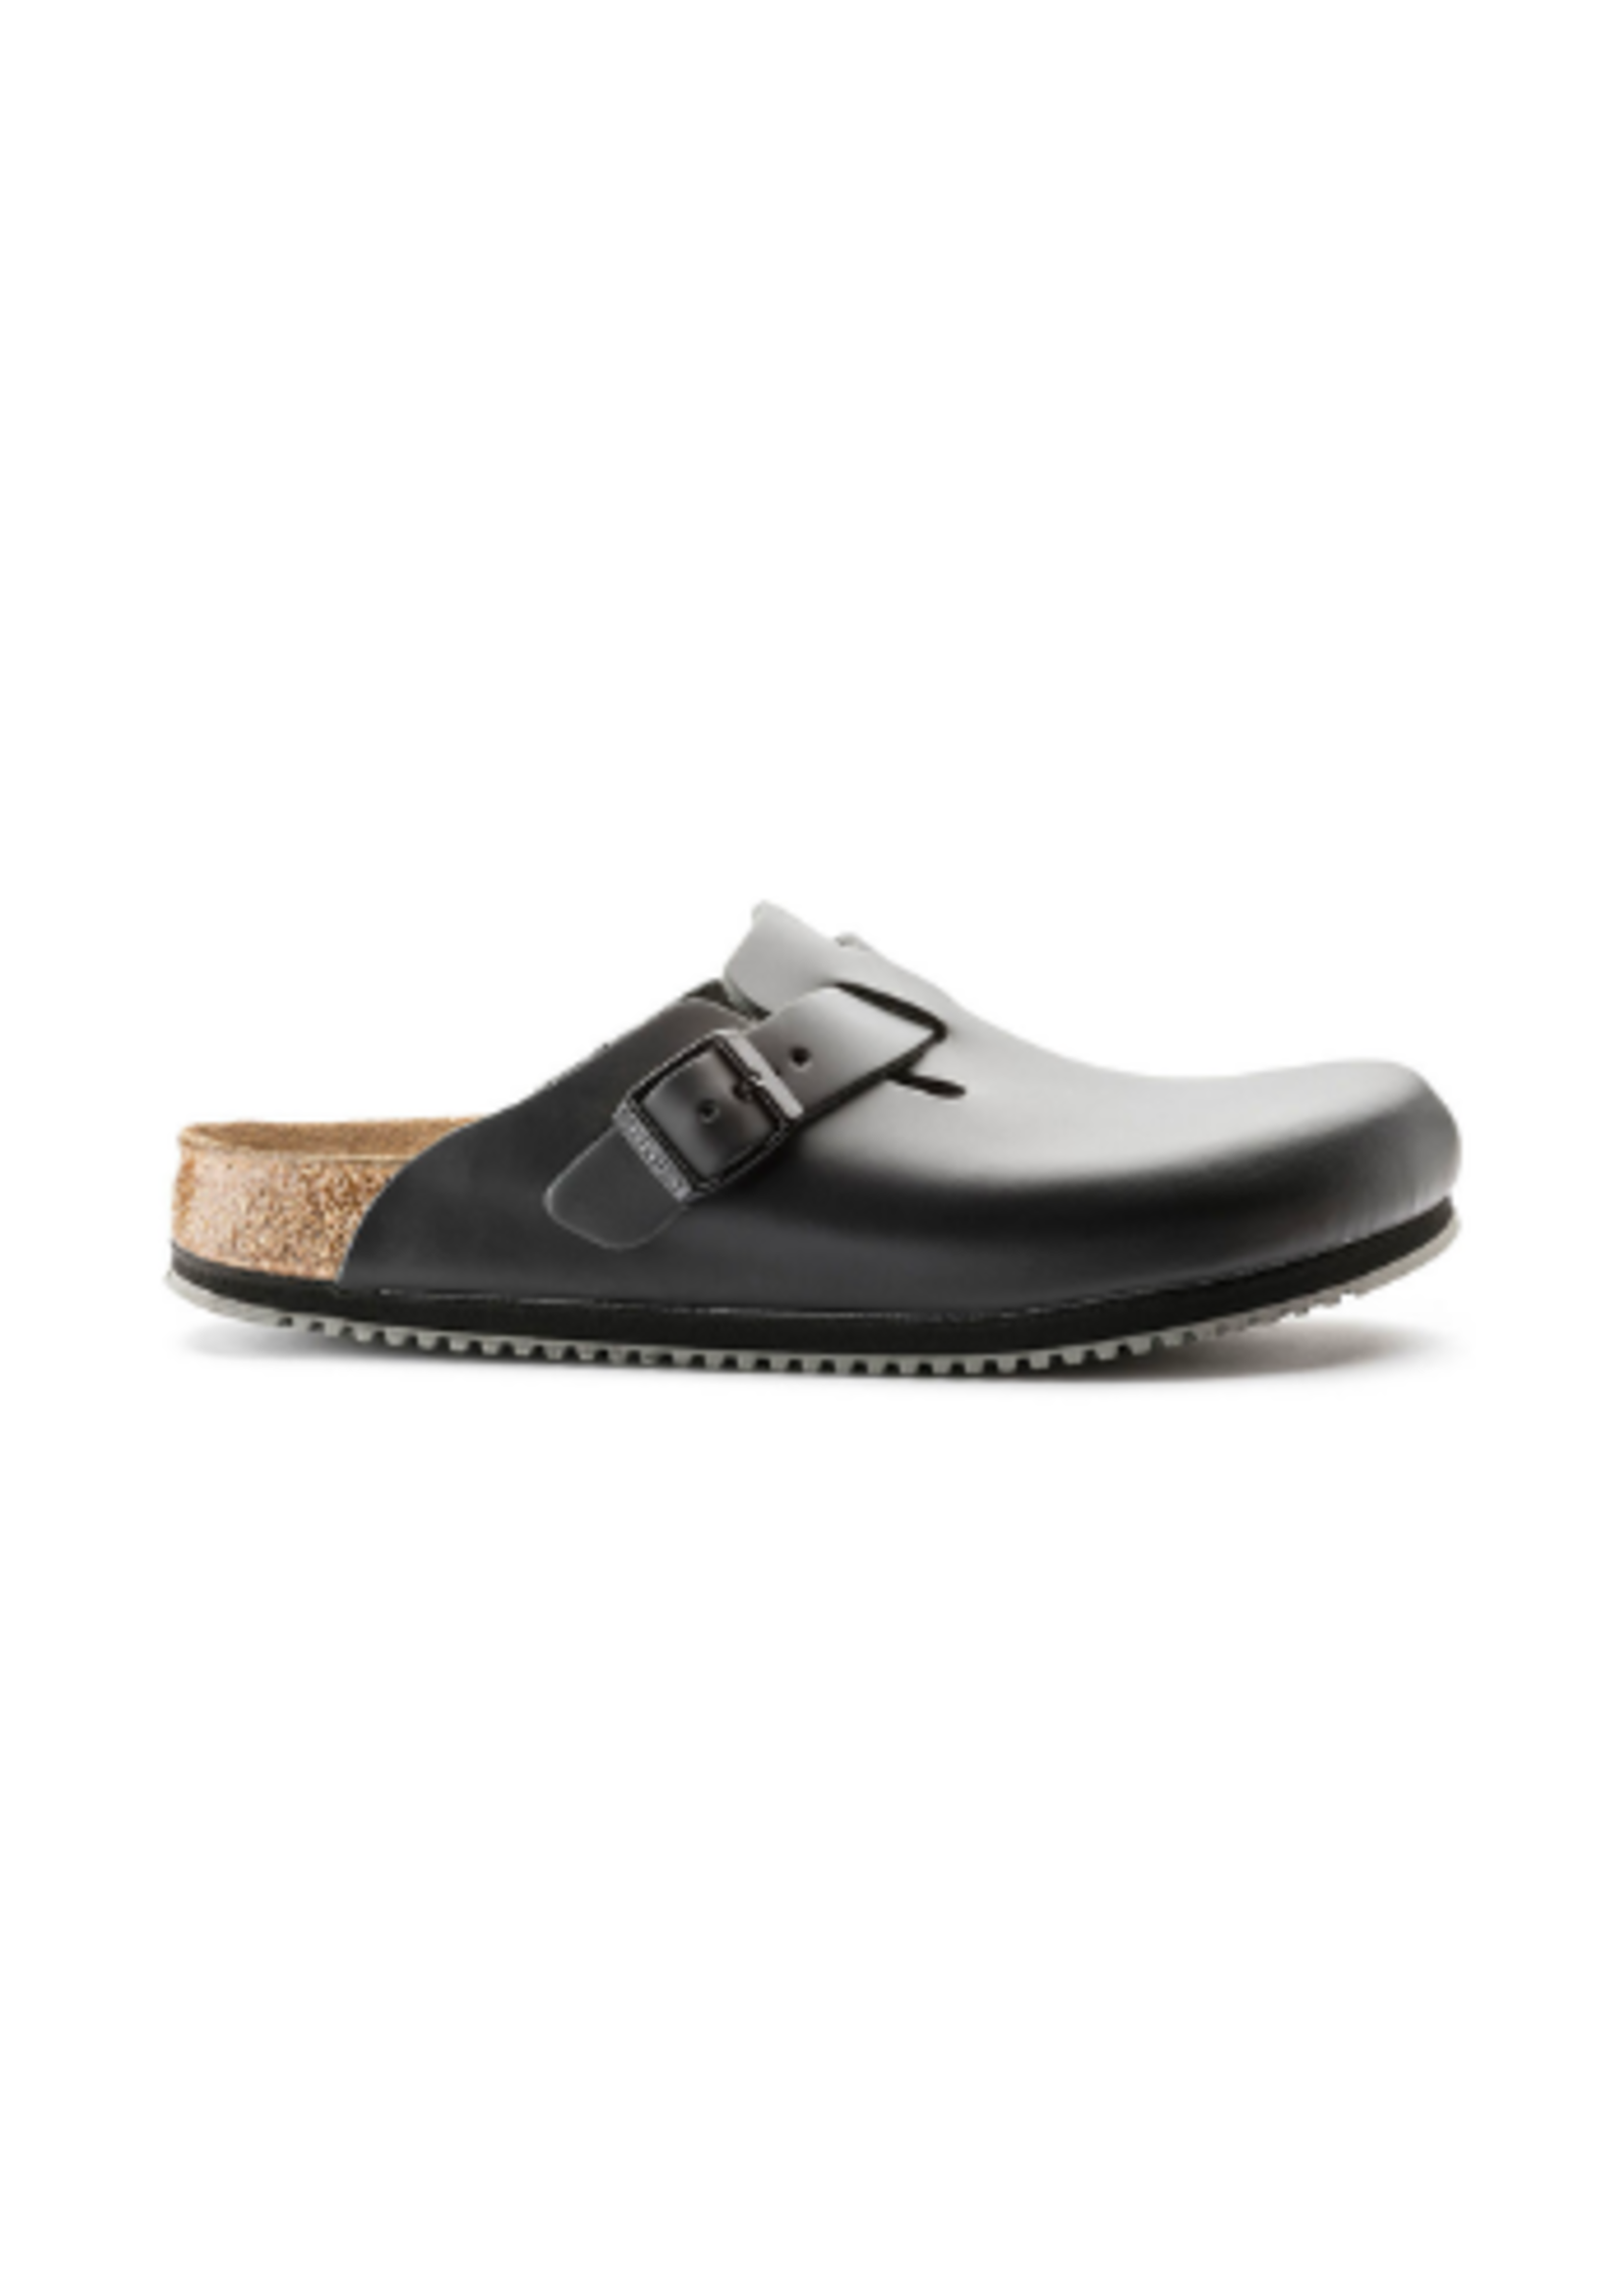 Birkenstock Boston - Supergrip Smooth Leather in Black (Classic Footbed - Supergrip Sole)